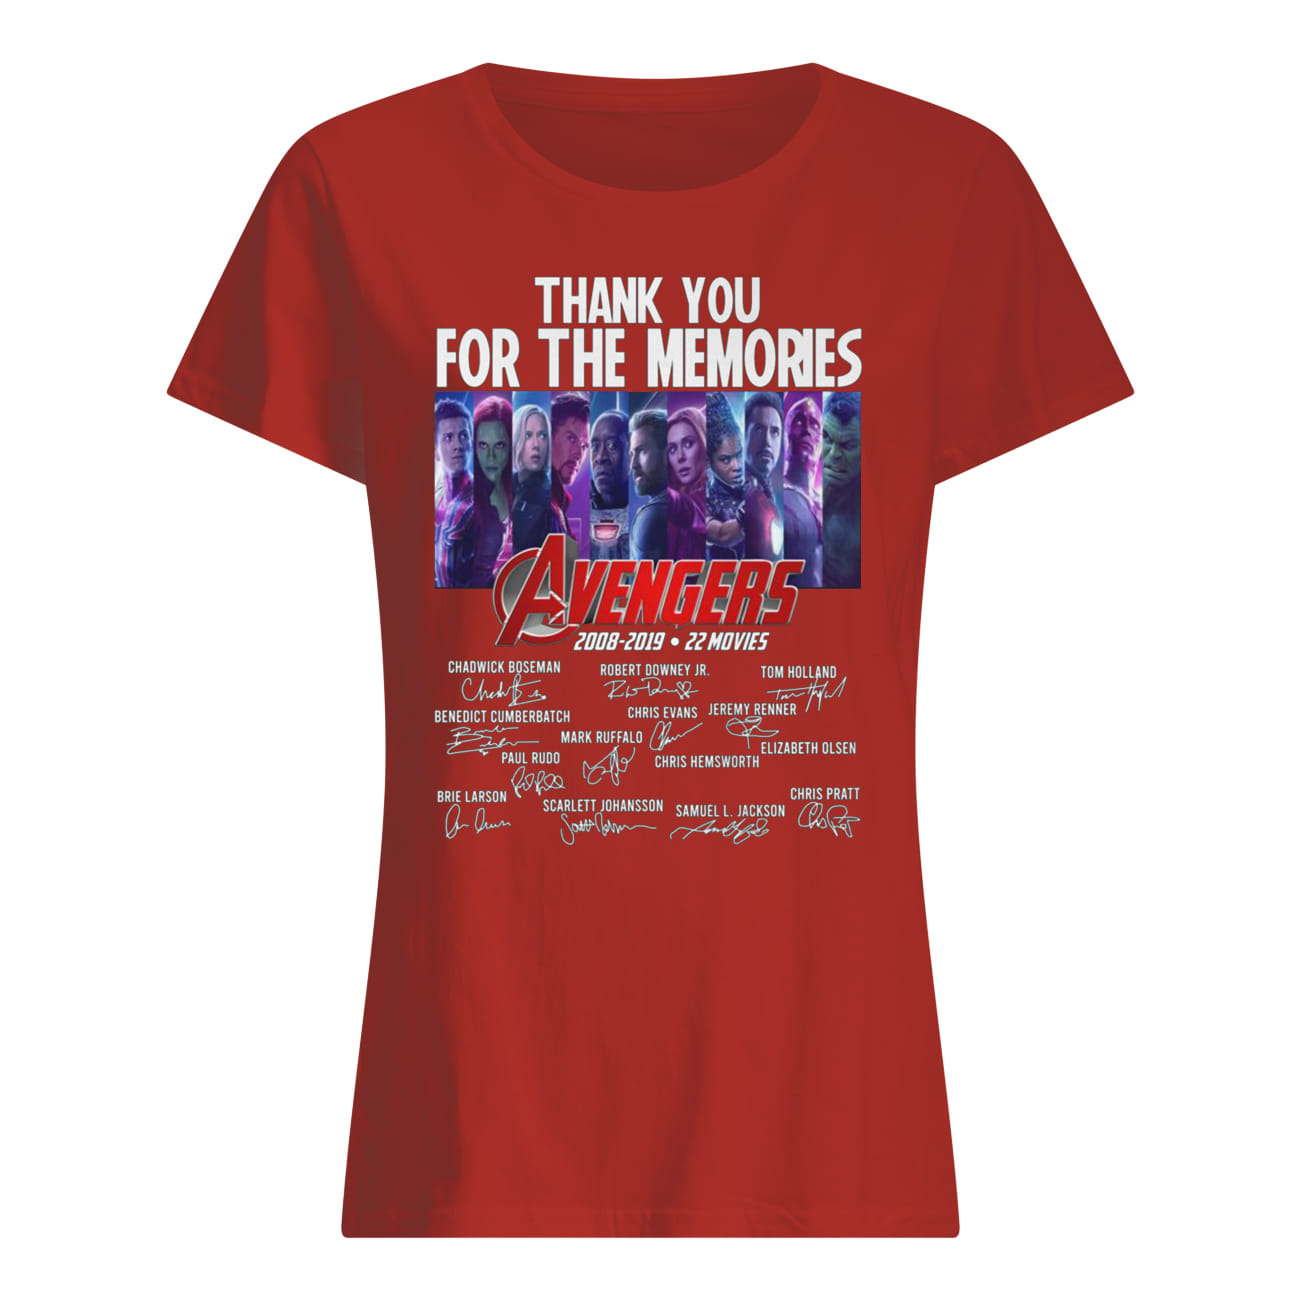 Thank you for the memories avengers 2008-2019 22 movies signature lady shirt